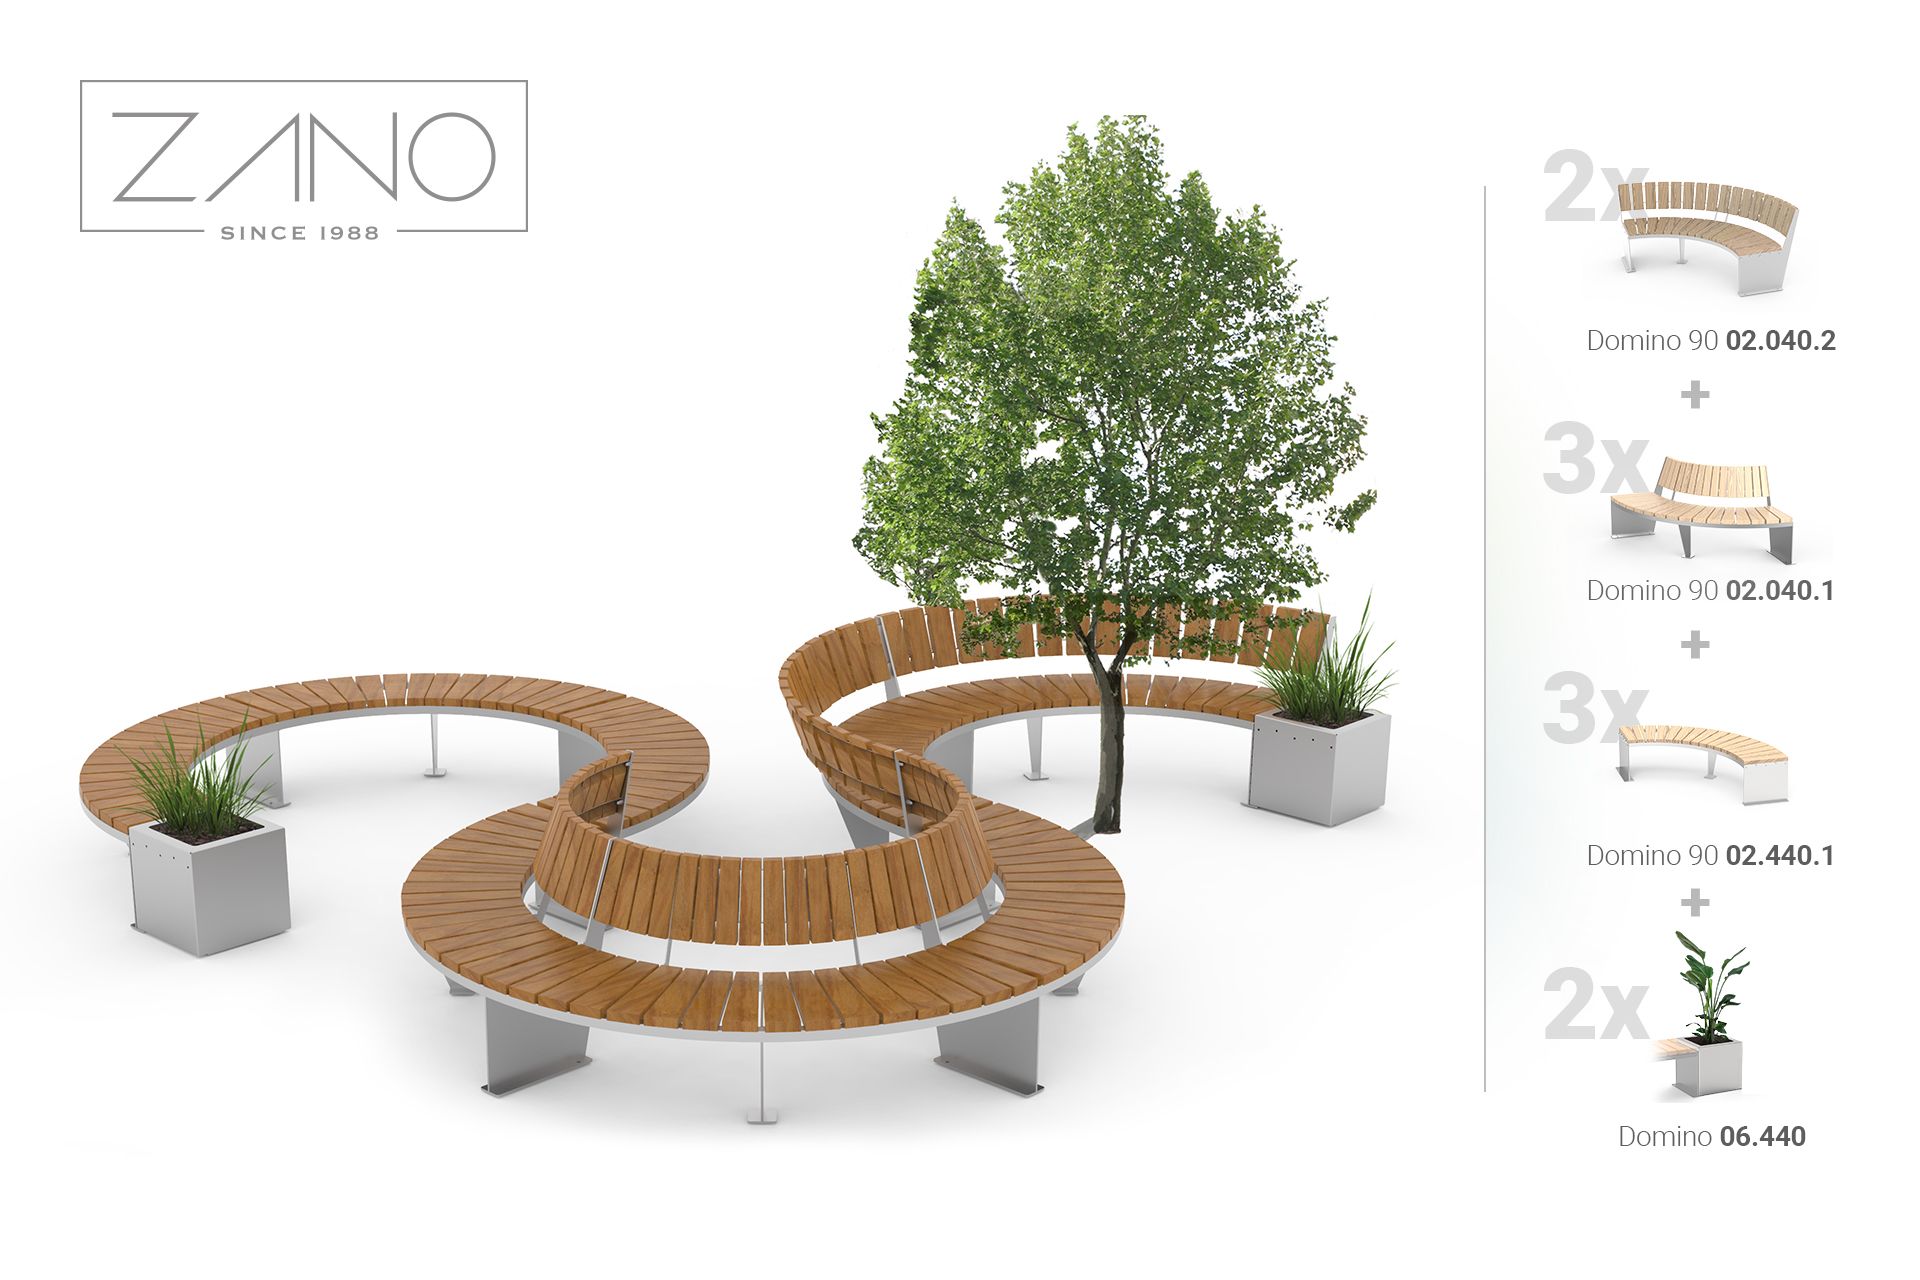 Combination of benches and planters Domino | Planter 06.440